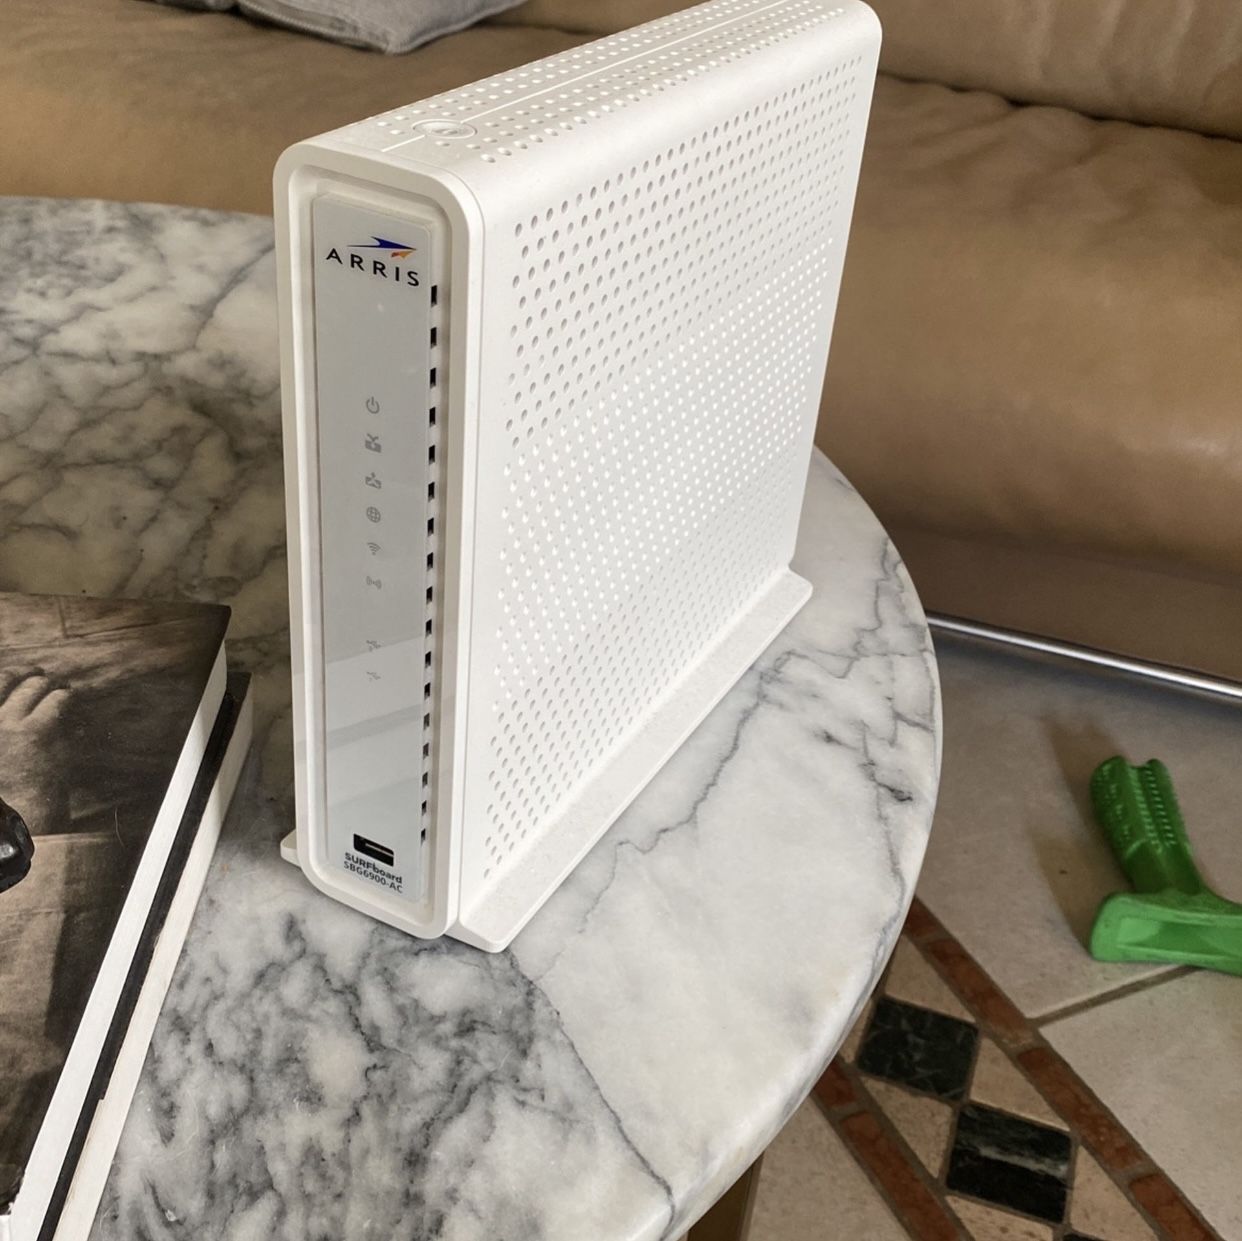 Arris Surfboard SBG6900-AC Modem And Wifi Router